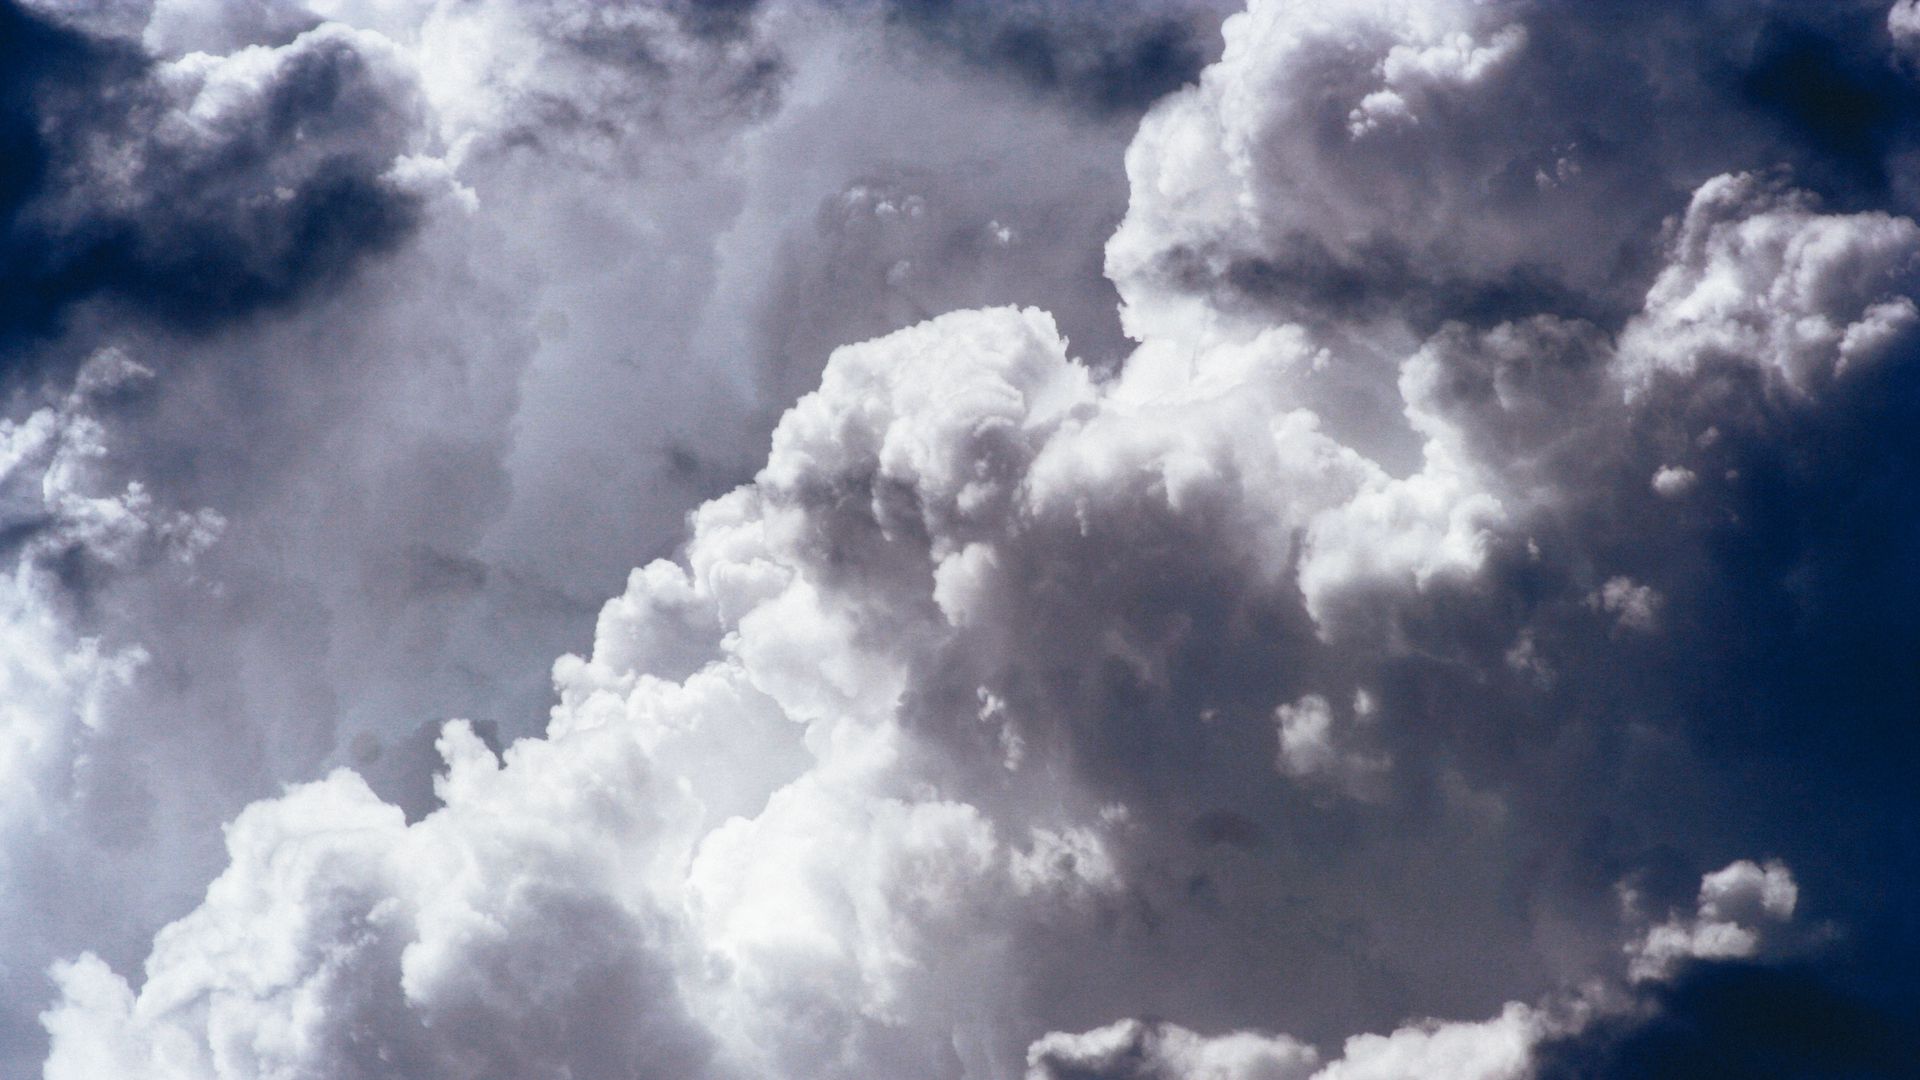 Download wallpaper 1920x1080 clouds, sky, cloudy, overcast full hd, hdtv,  fhd, 1080p hd background